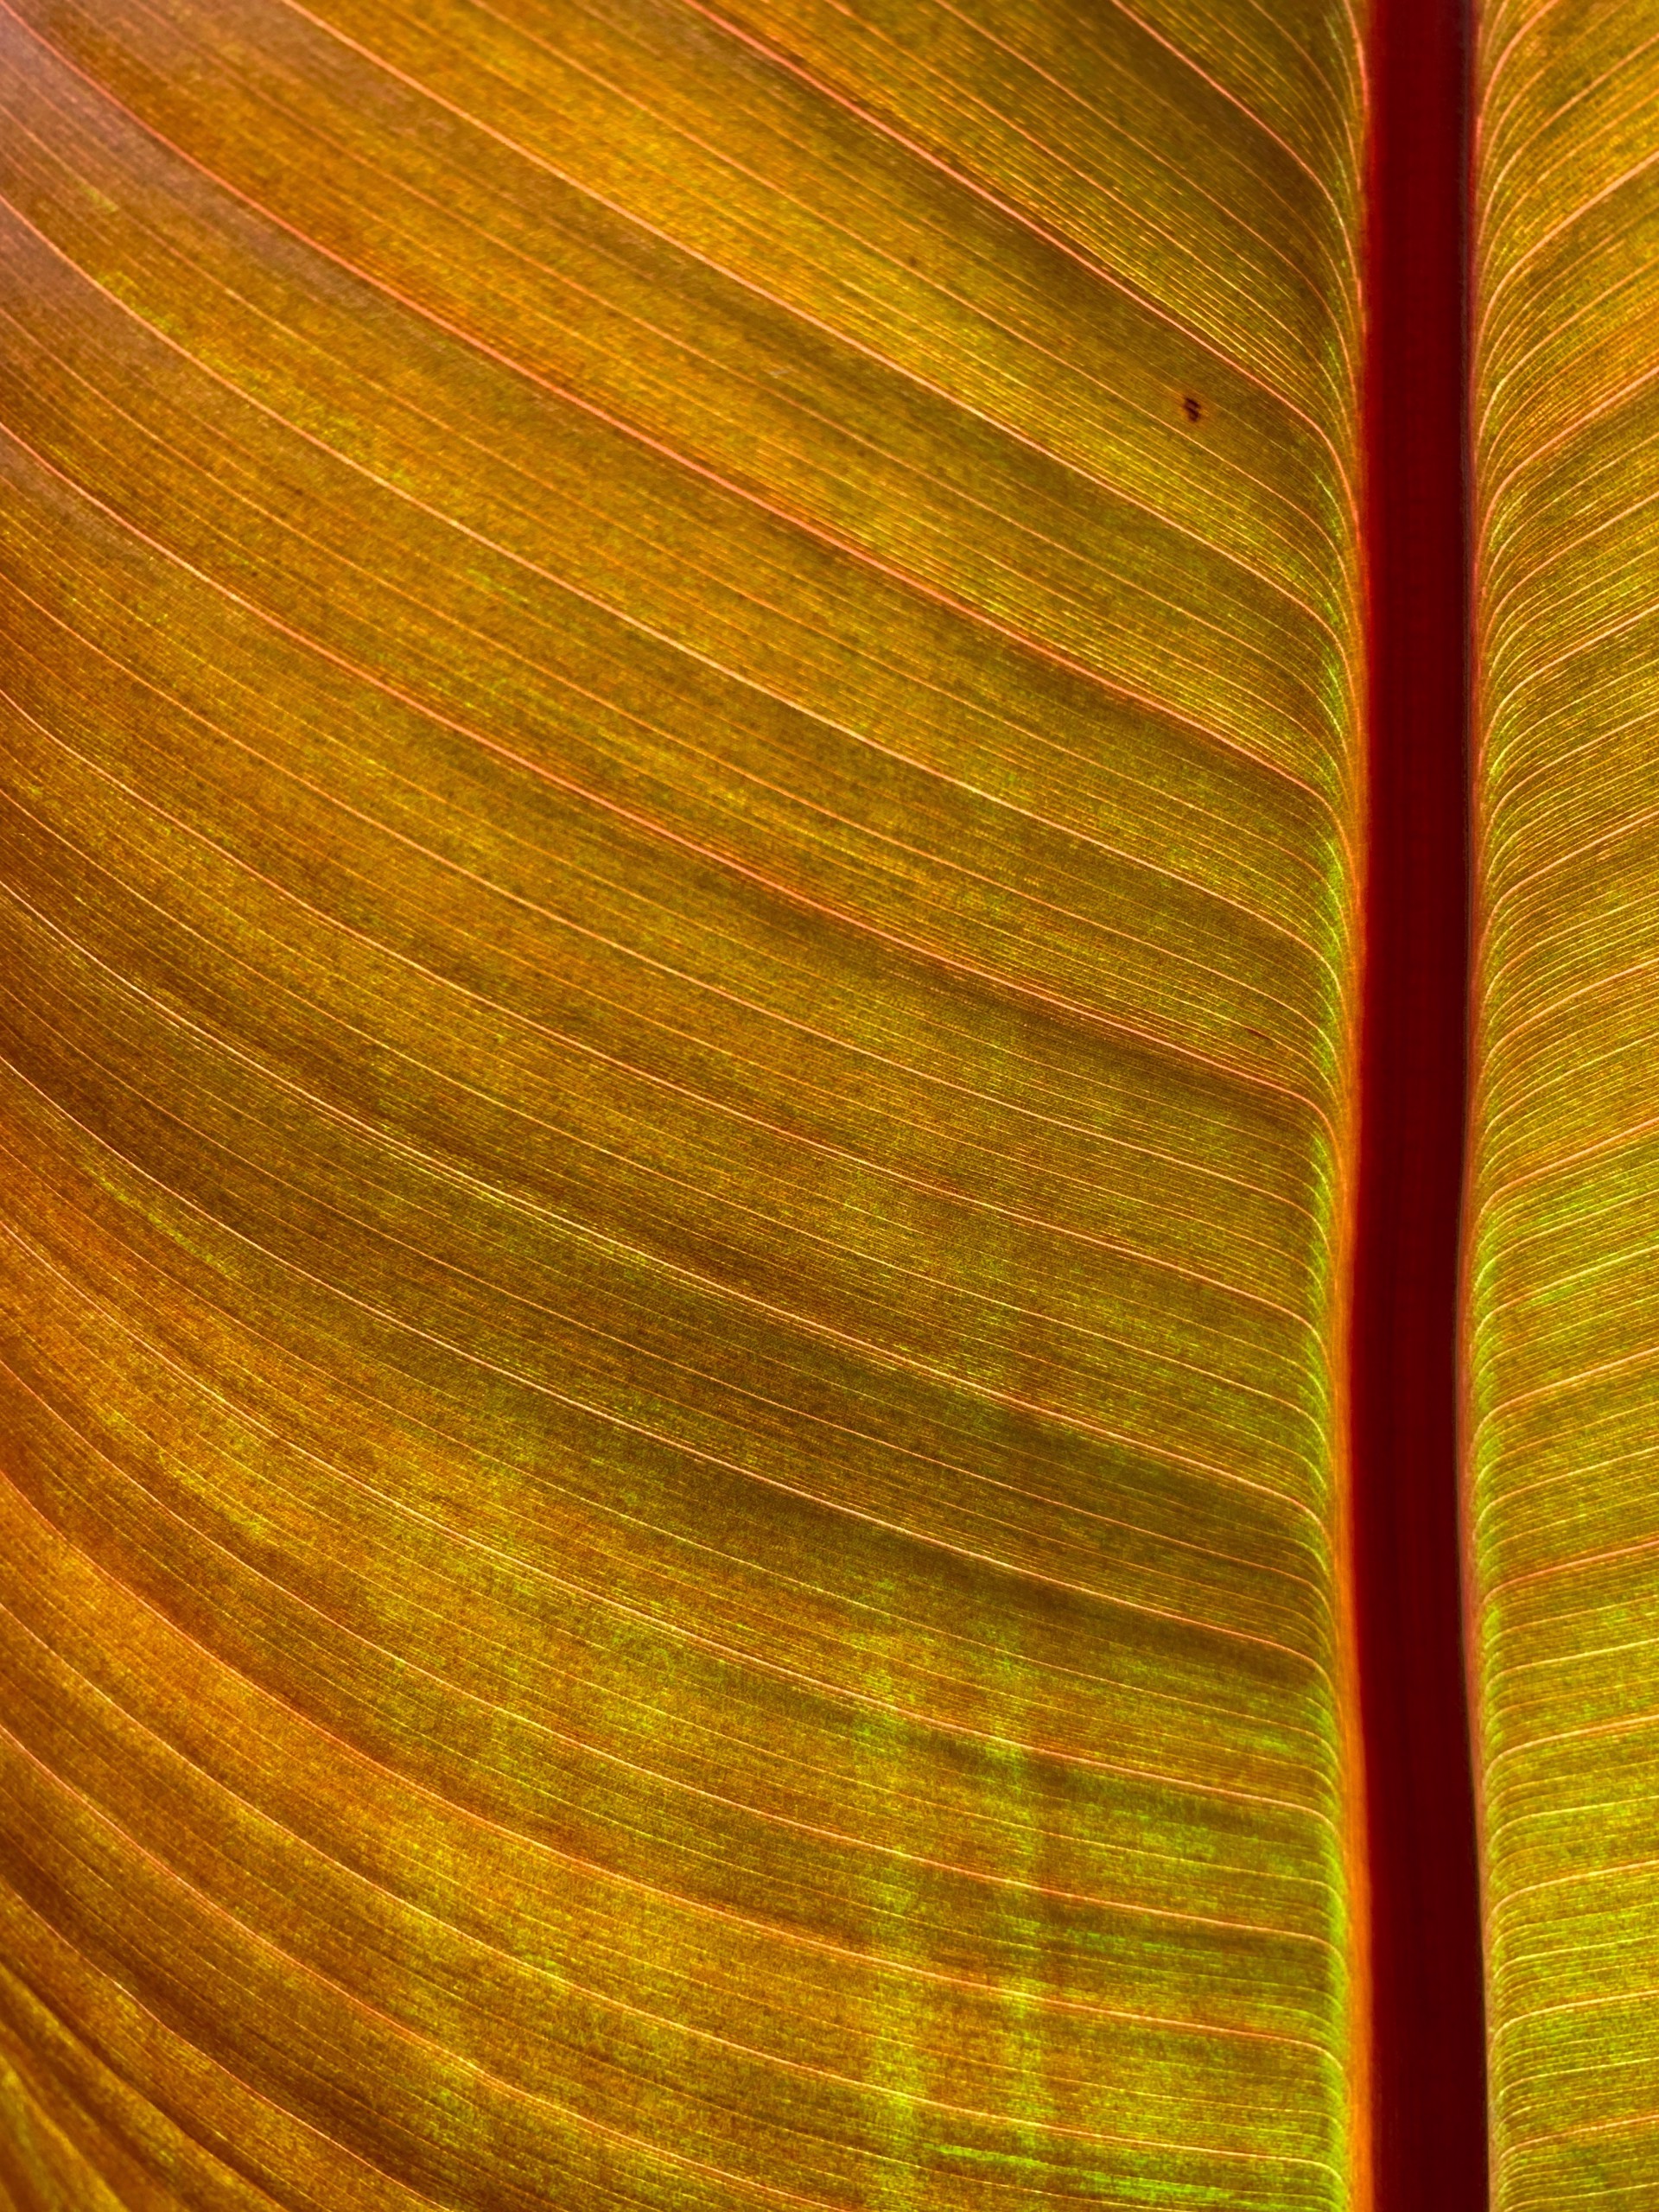 Abyssinian Banana 2 (Ensete Ventricosum) by Amy Kaslow